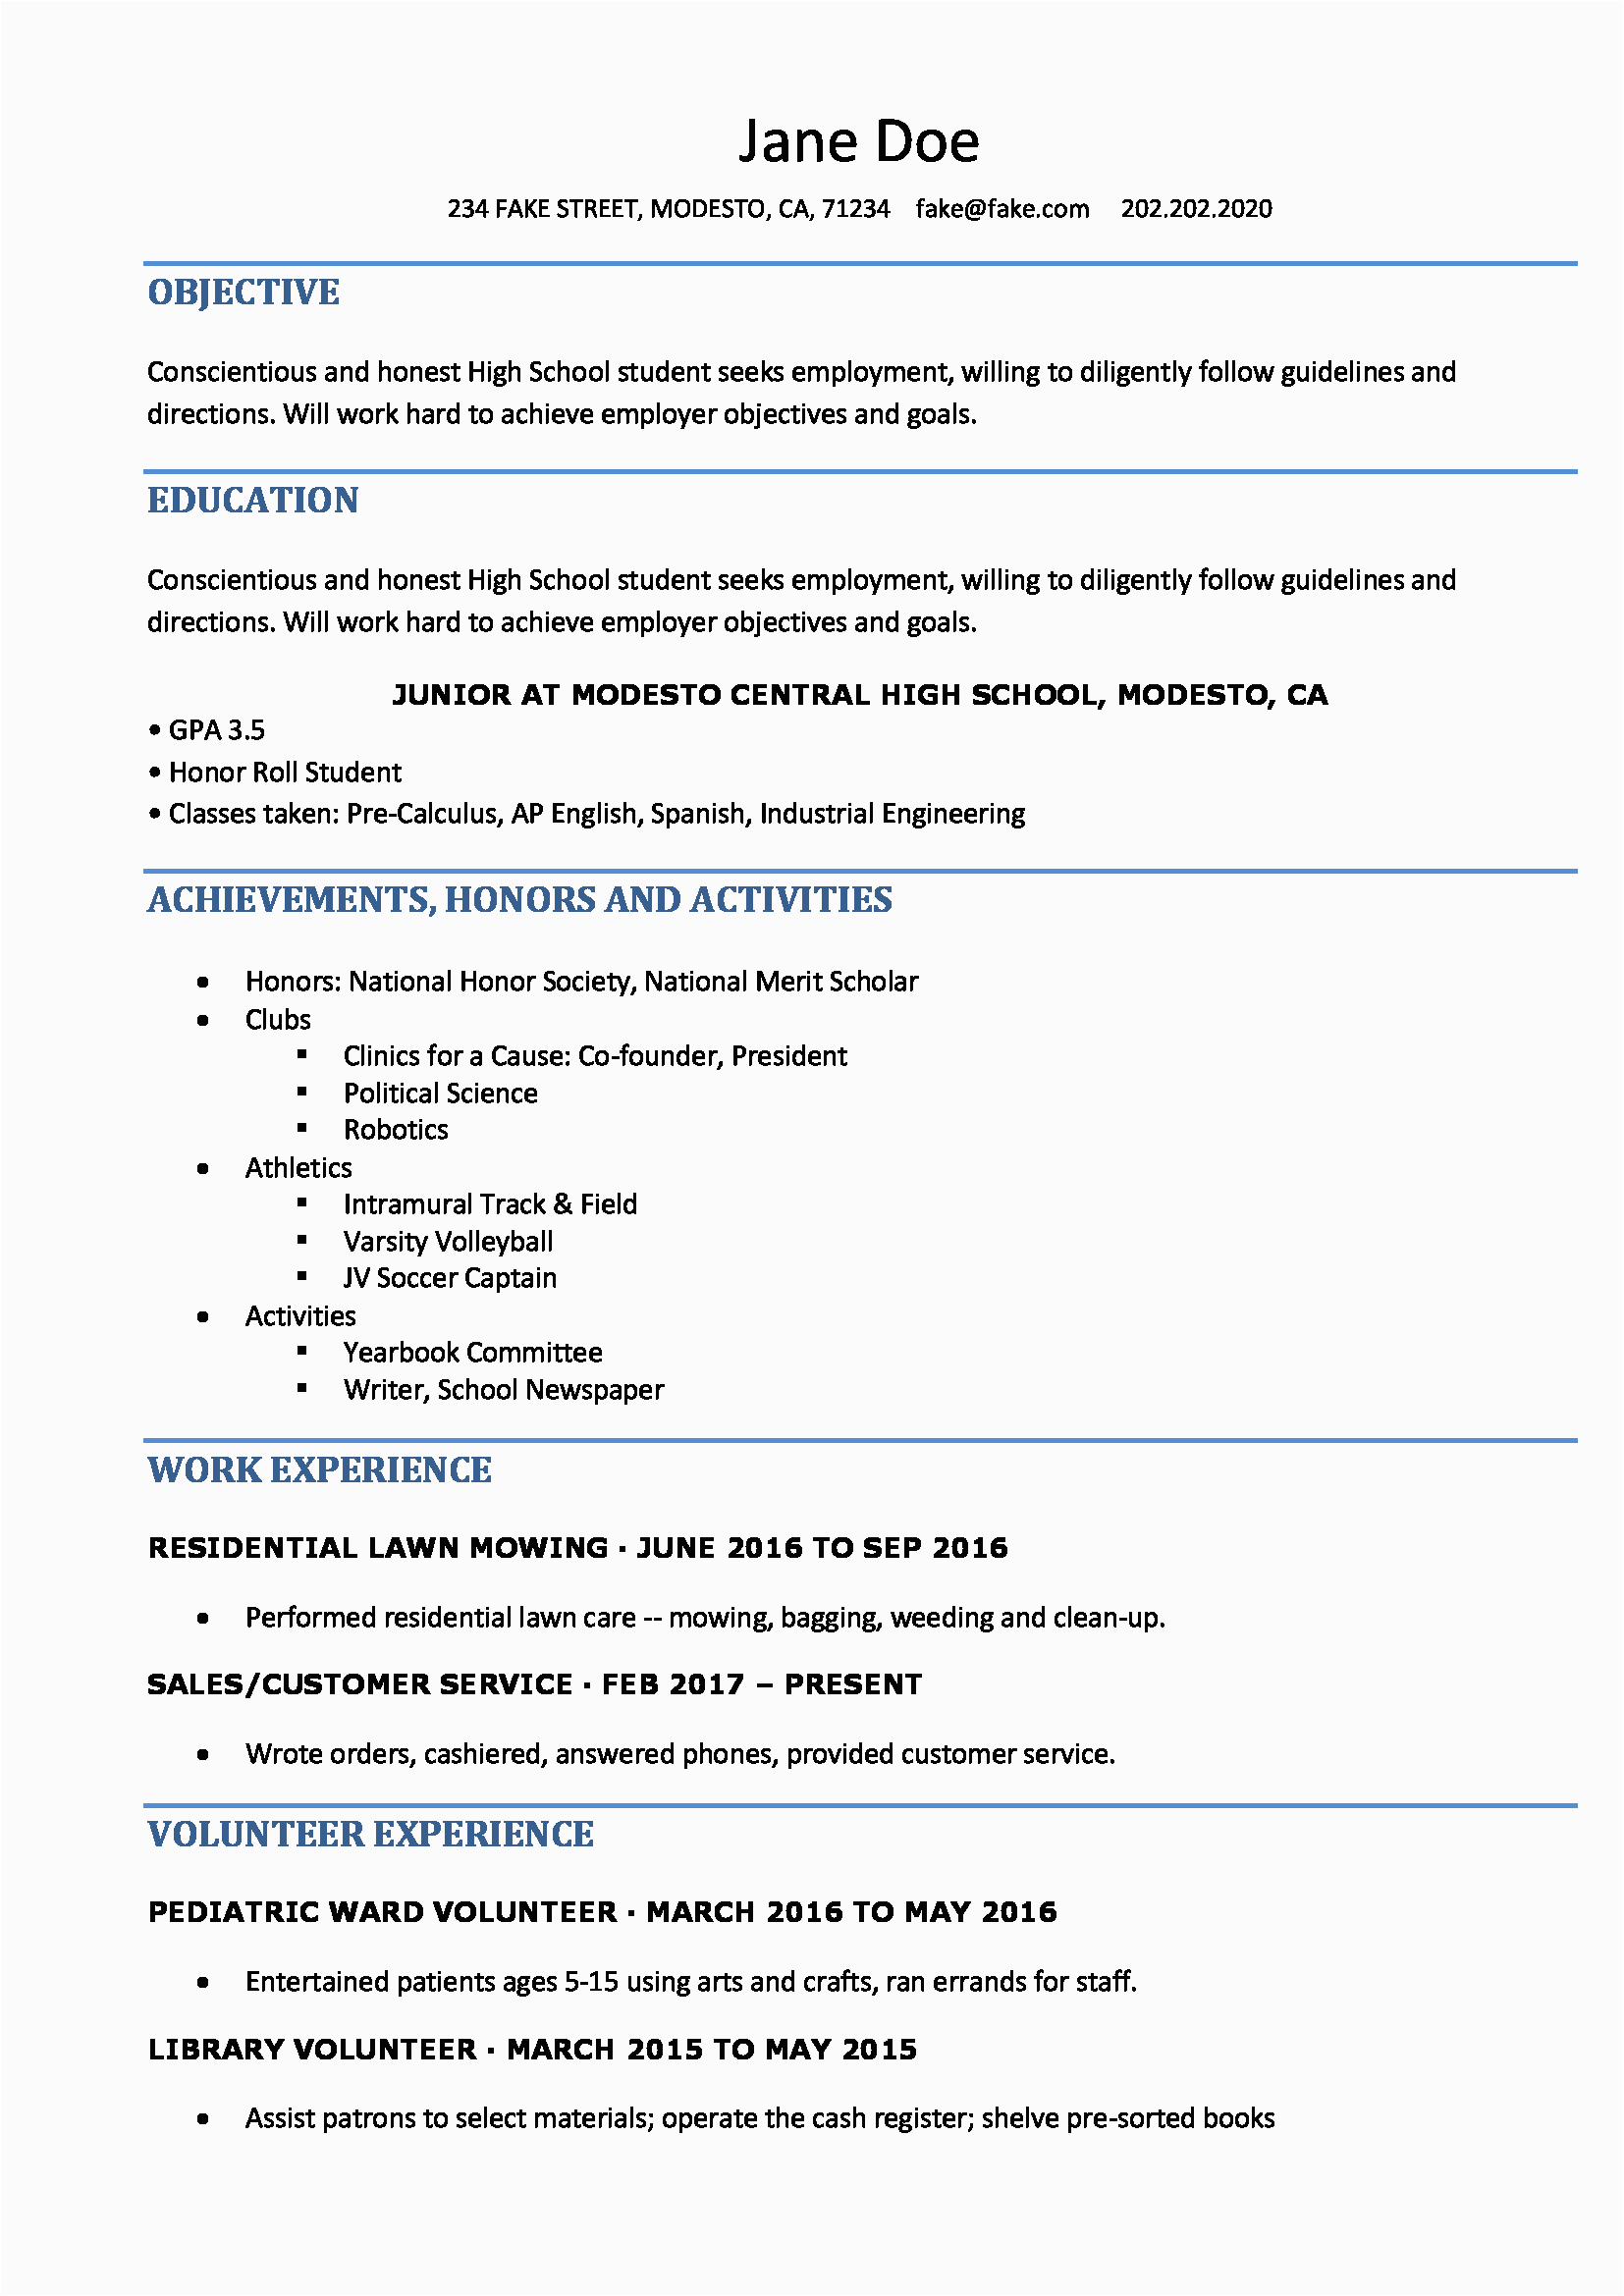 Free Resume Samples for Highschool Students High School Resume Resume Templates for High School